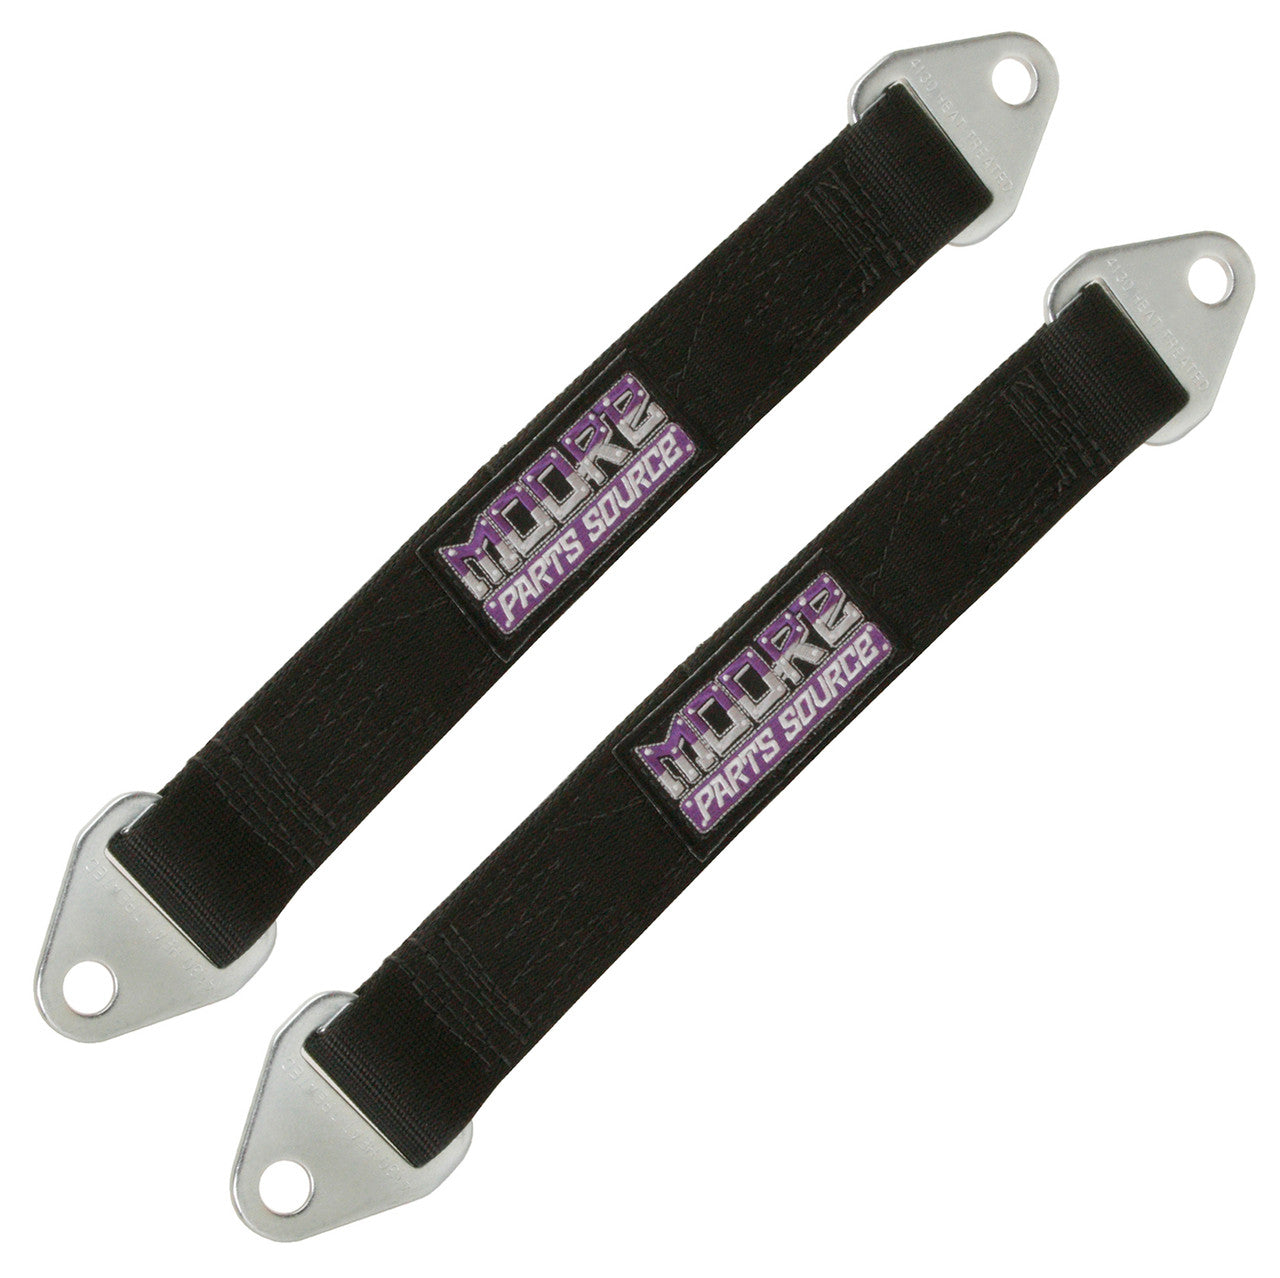 34 Inch USA Made Off-Road Suspension Limit Straps, Sold As Pair